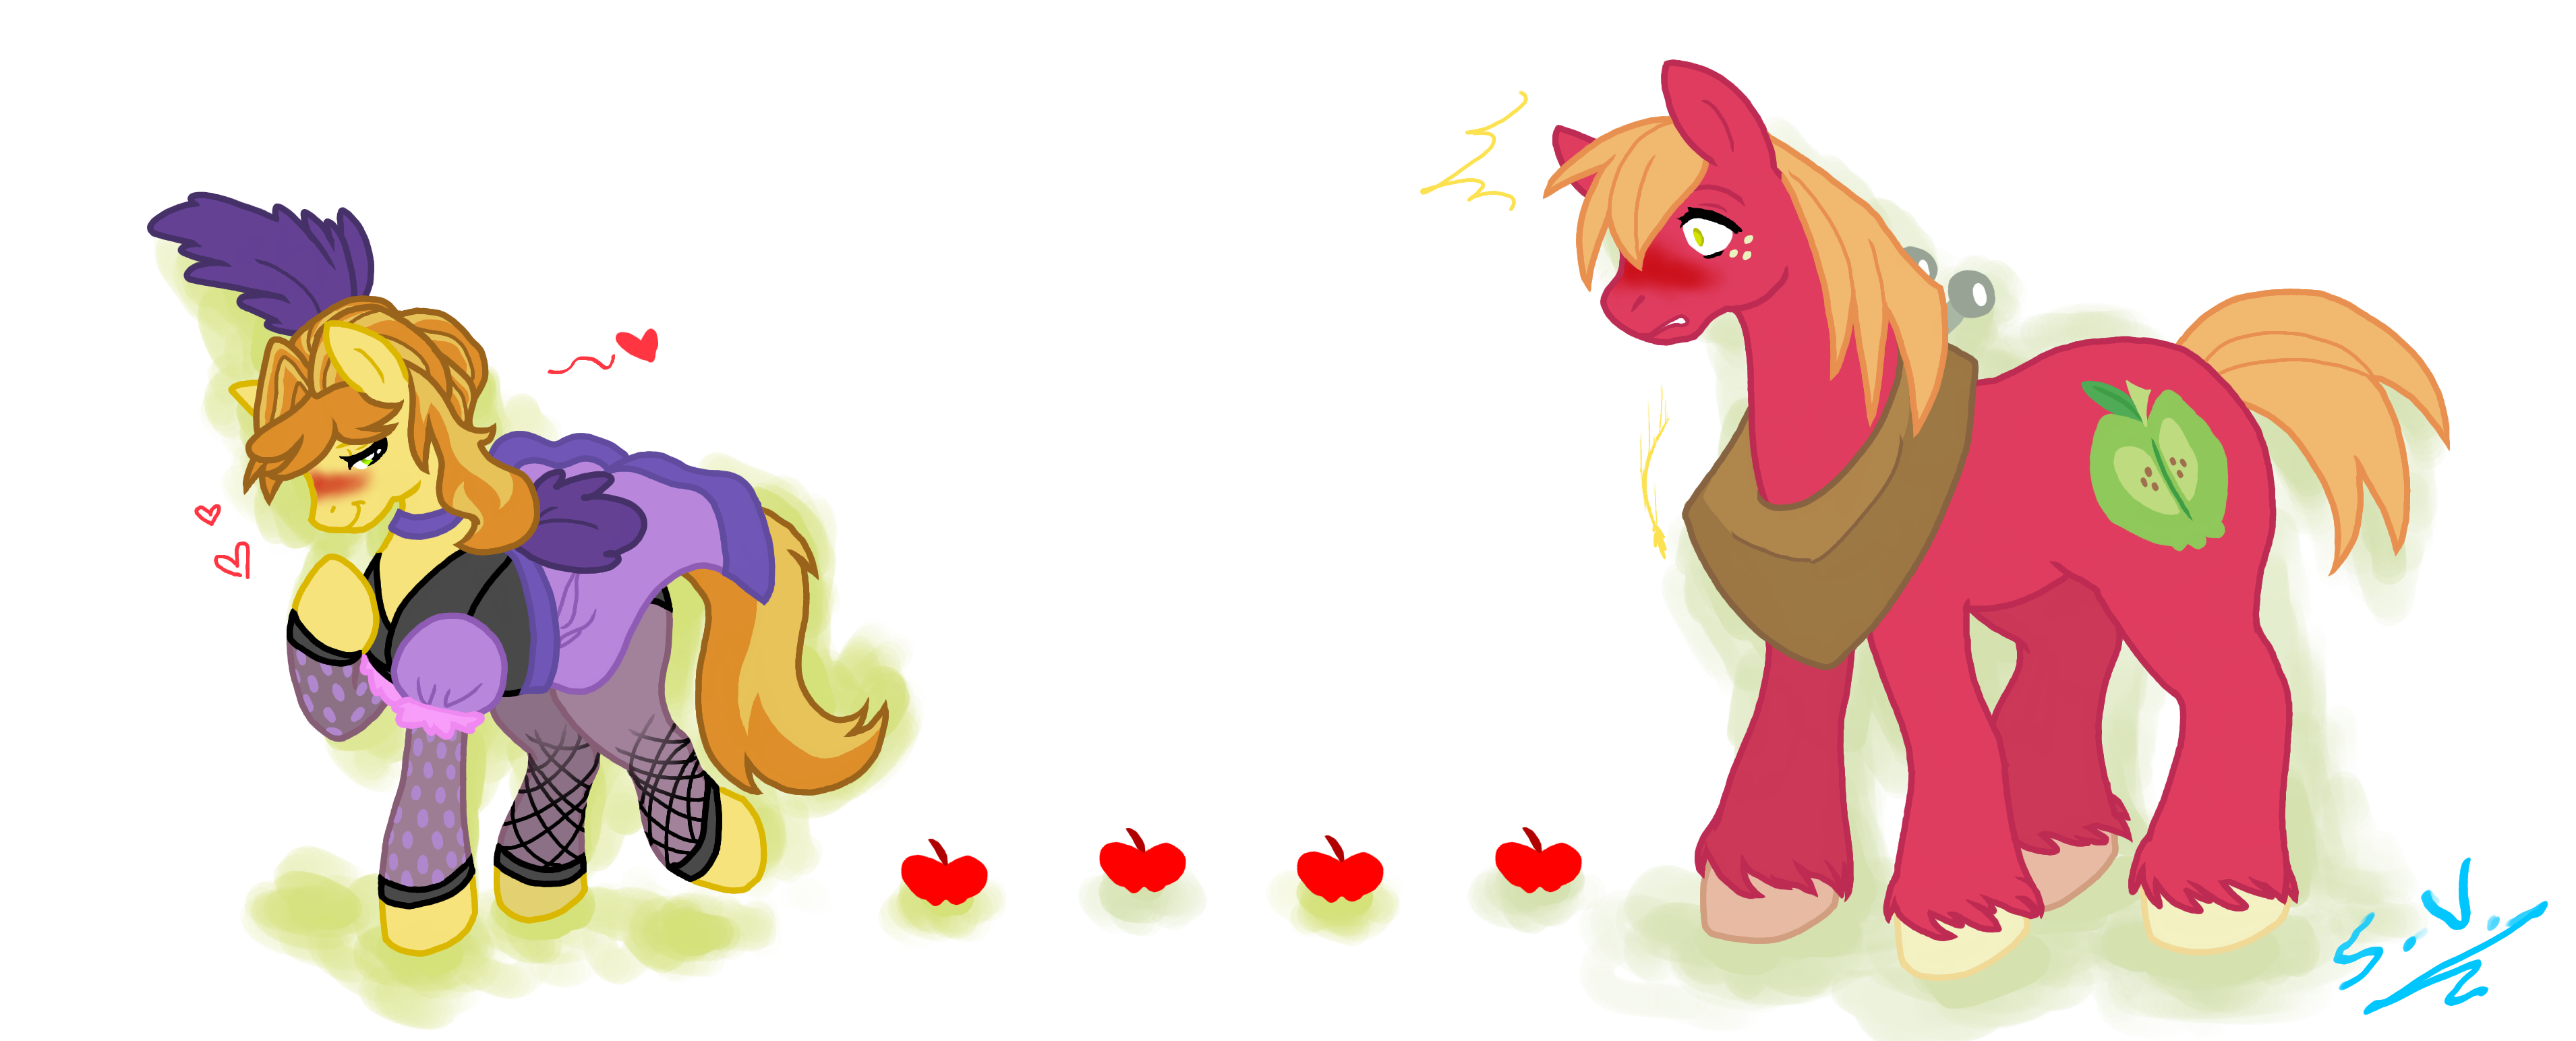 __mlp___everypony__s_gay_for_braeburn_by